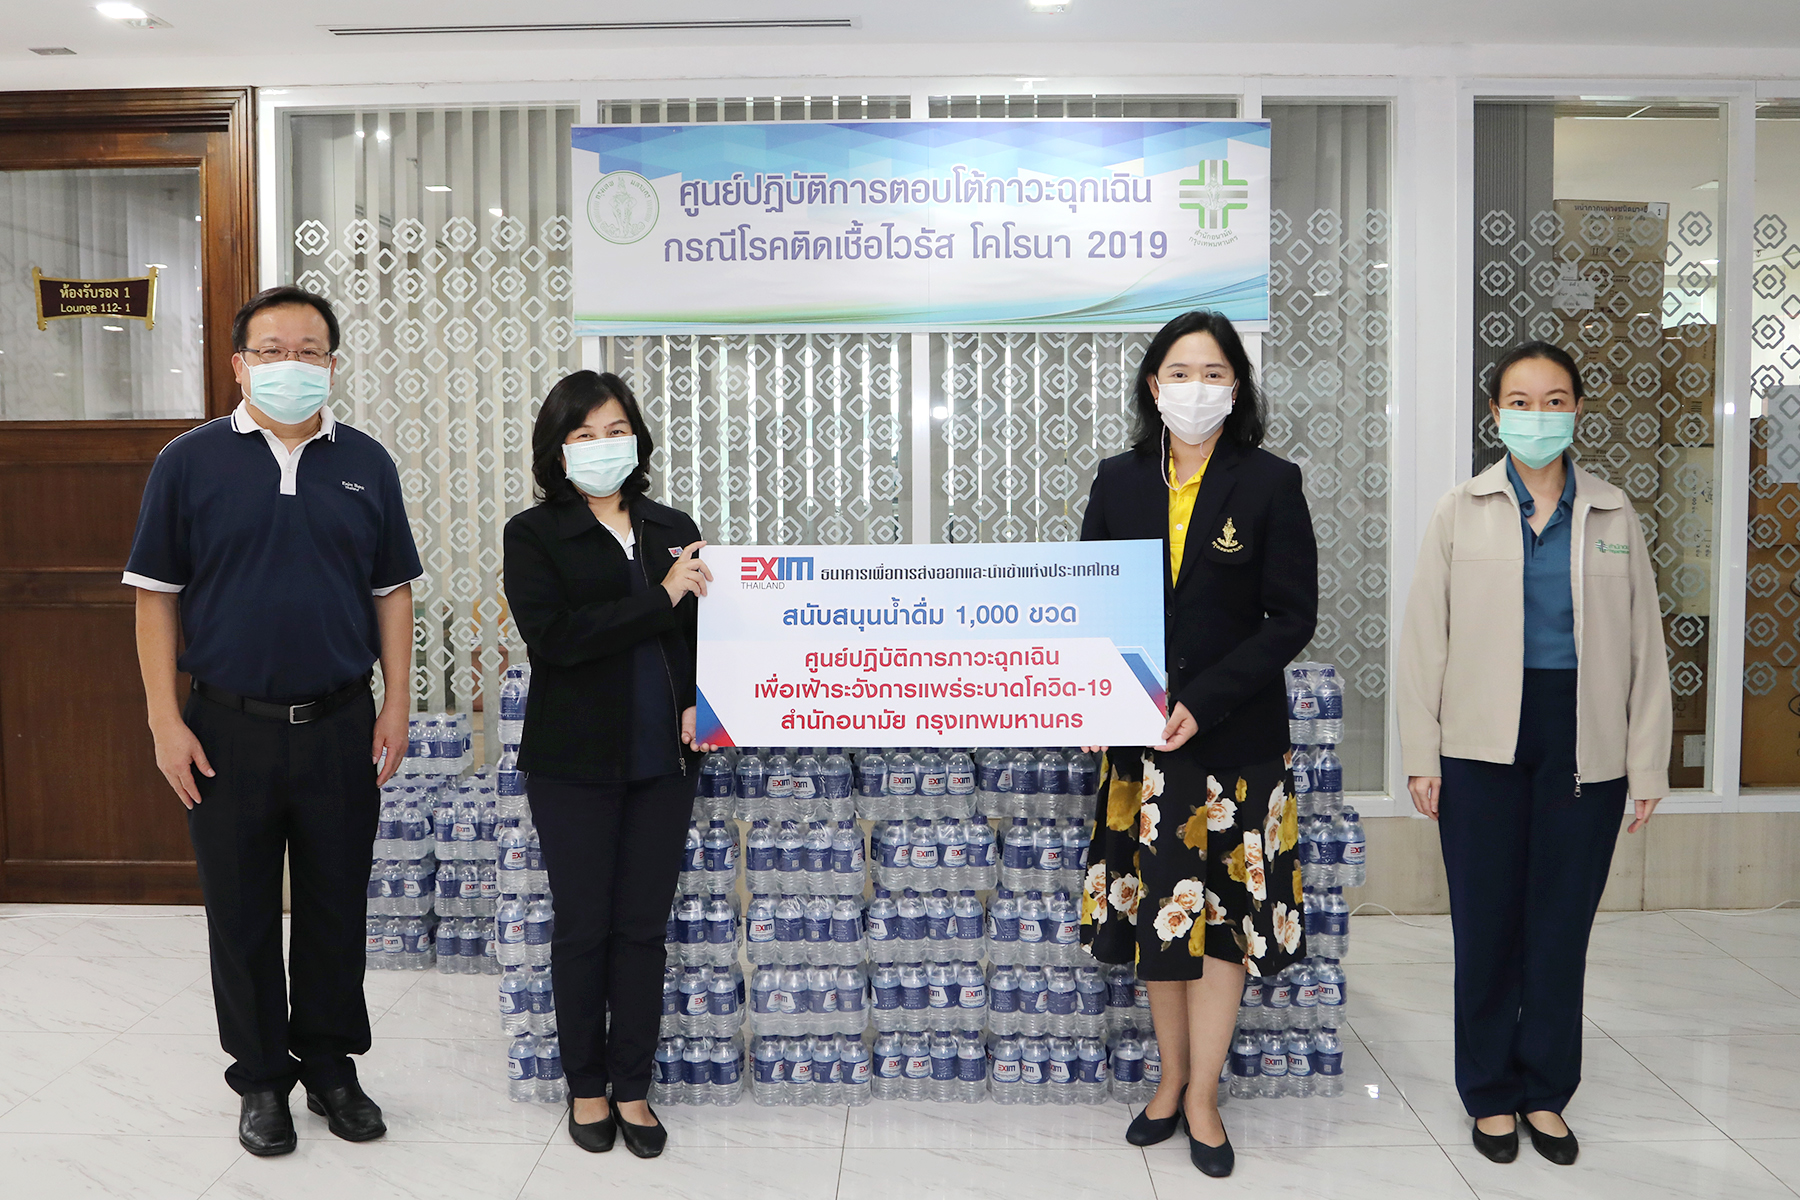 EXIM Thailand Delivers Bottled Drinking Water to BMA’s Emergency Operation Center in Support of Their Efforts to Combat the COVID-19 Pandemic